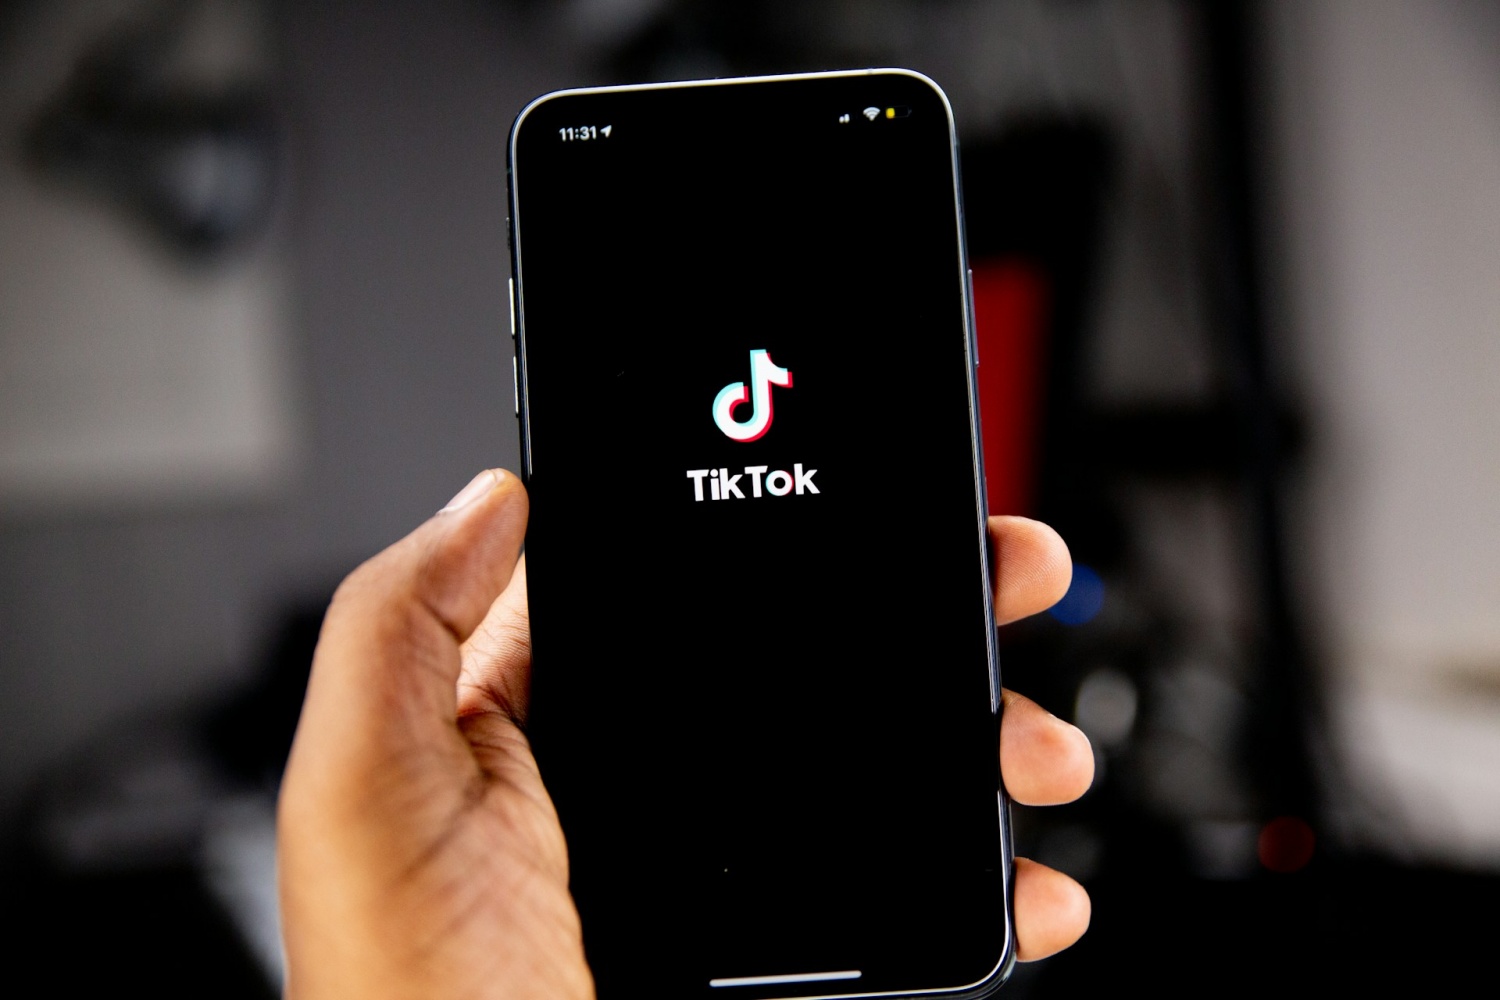 TikTok Buyout Could Be 'Disaster' Only For Investors to End Up Paying $100 Billion